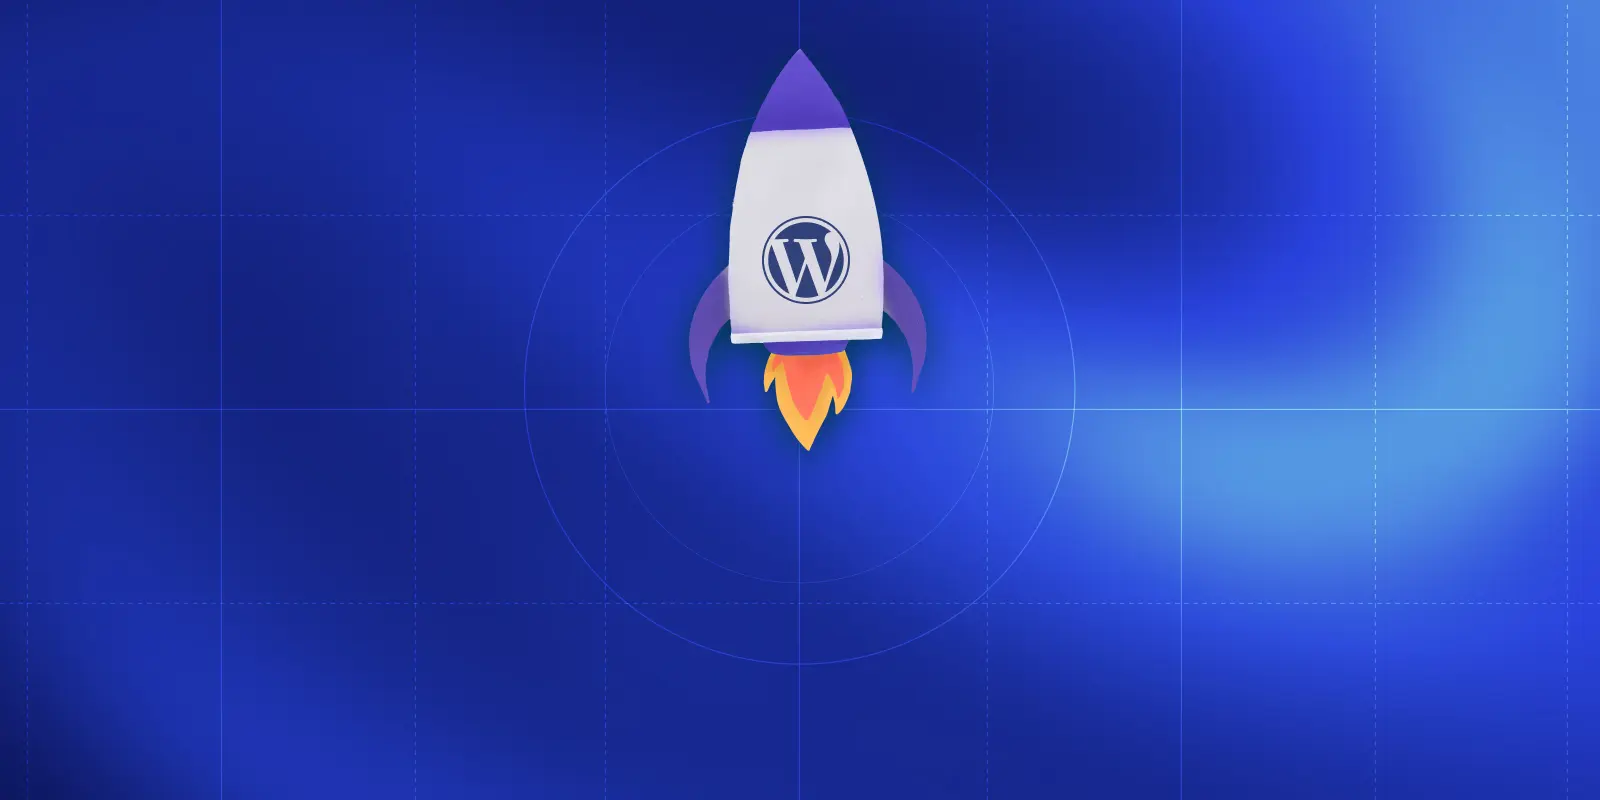 How to Skyrocket Your WordPress Site Performance